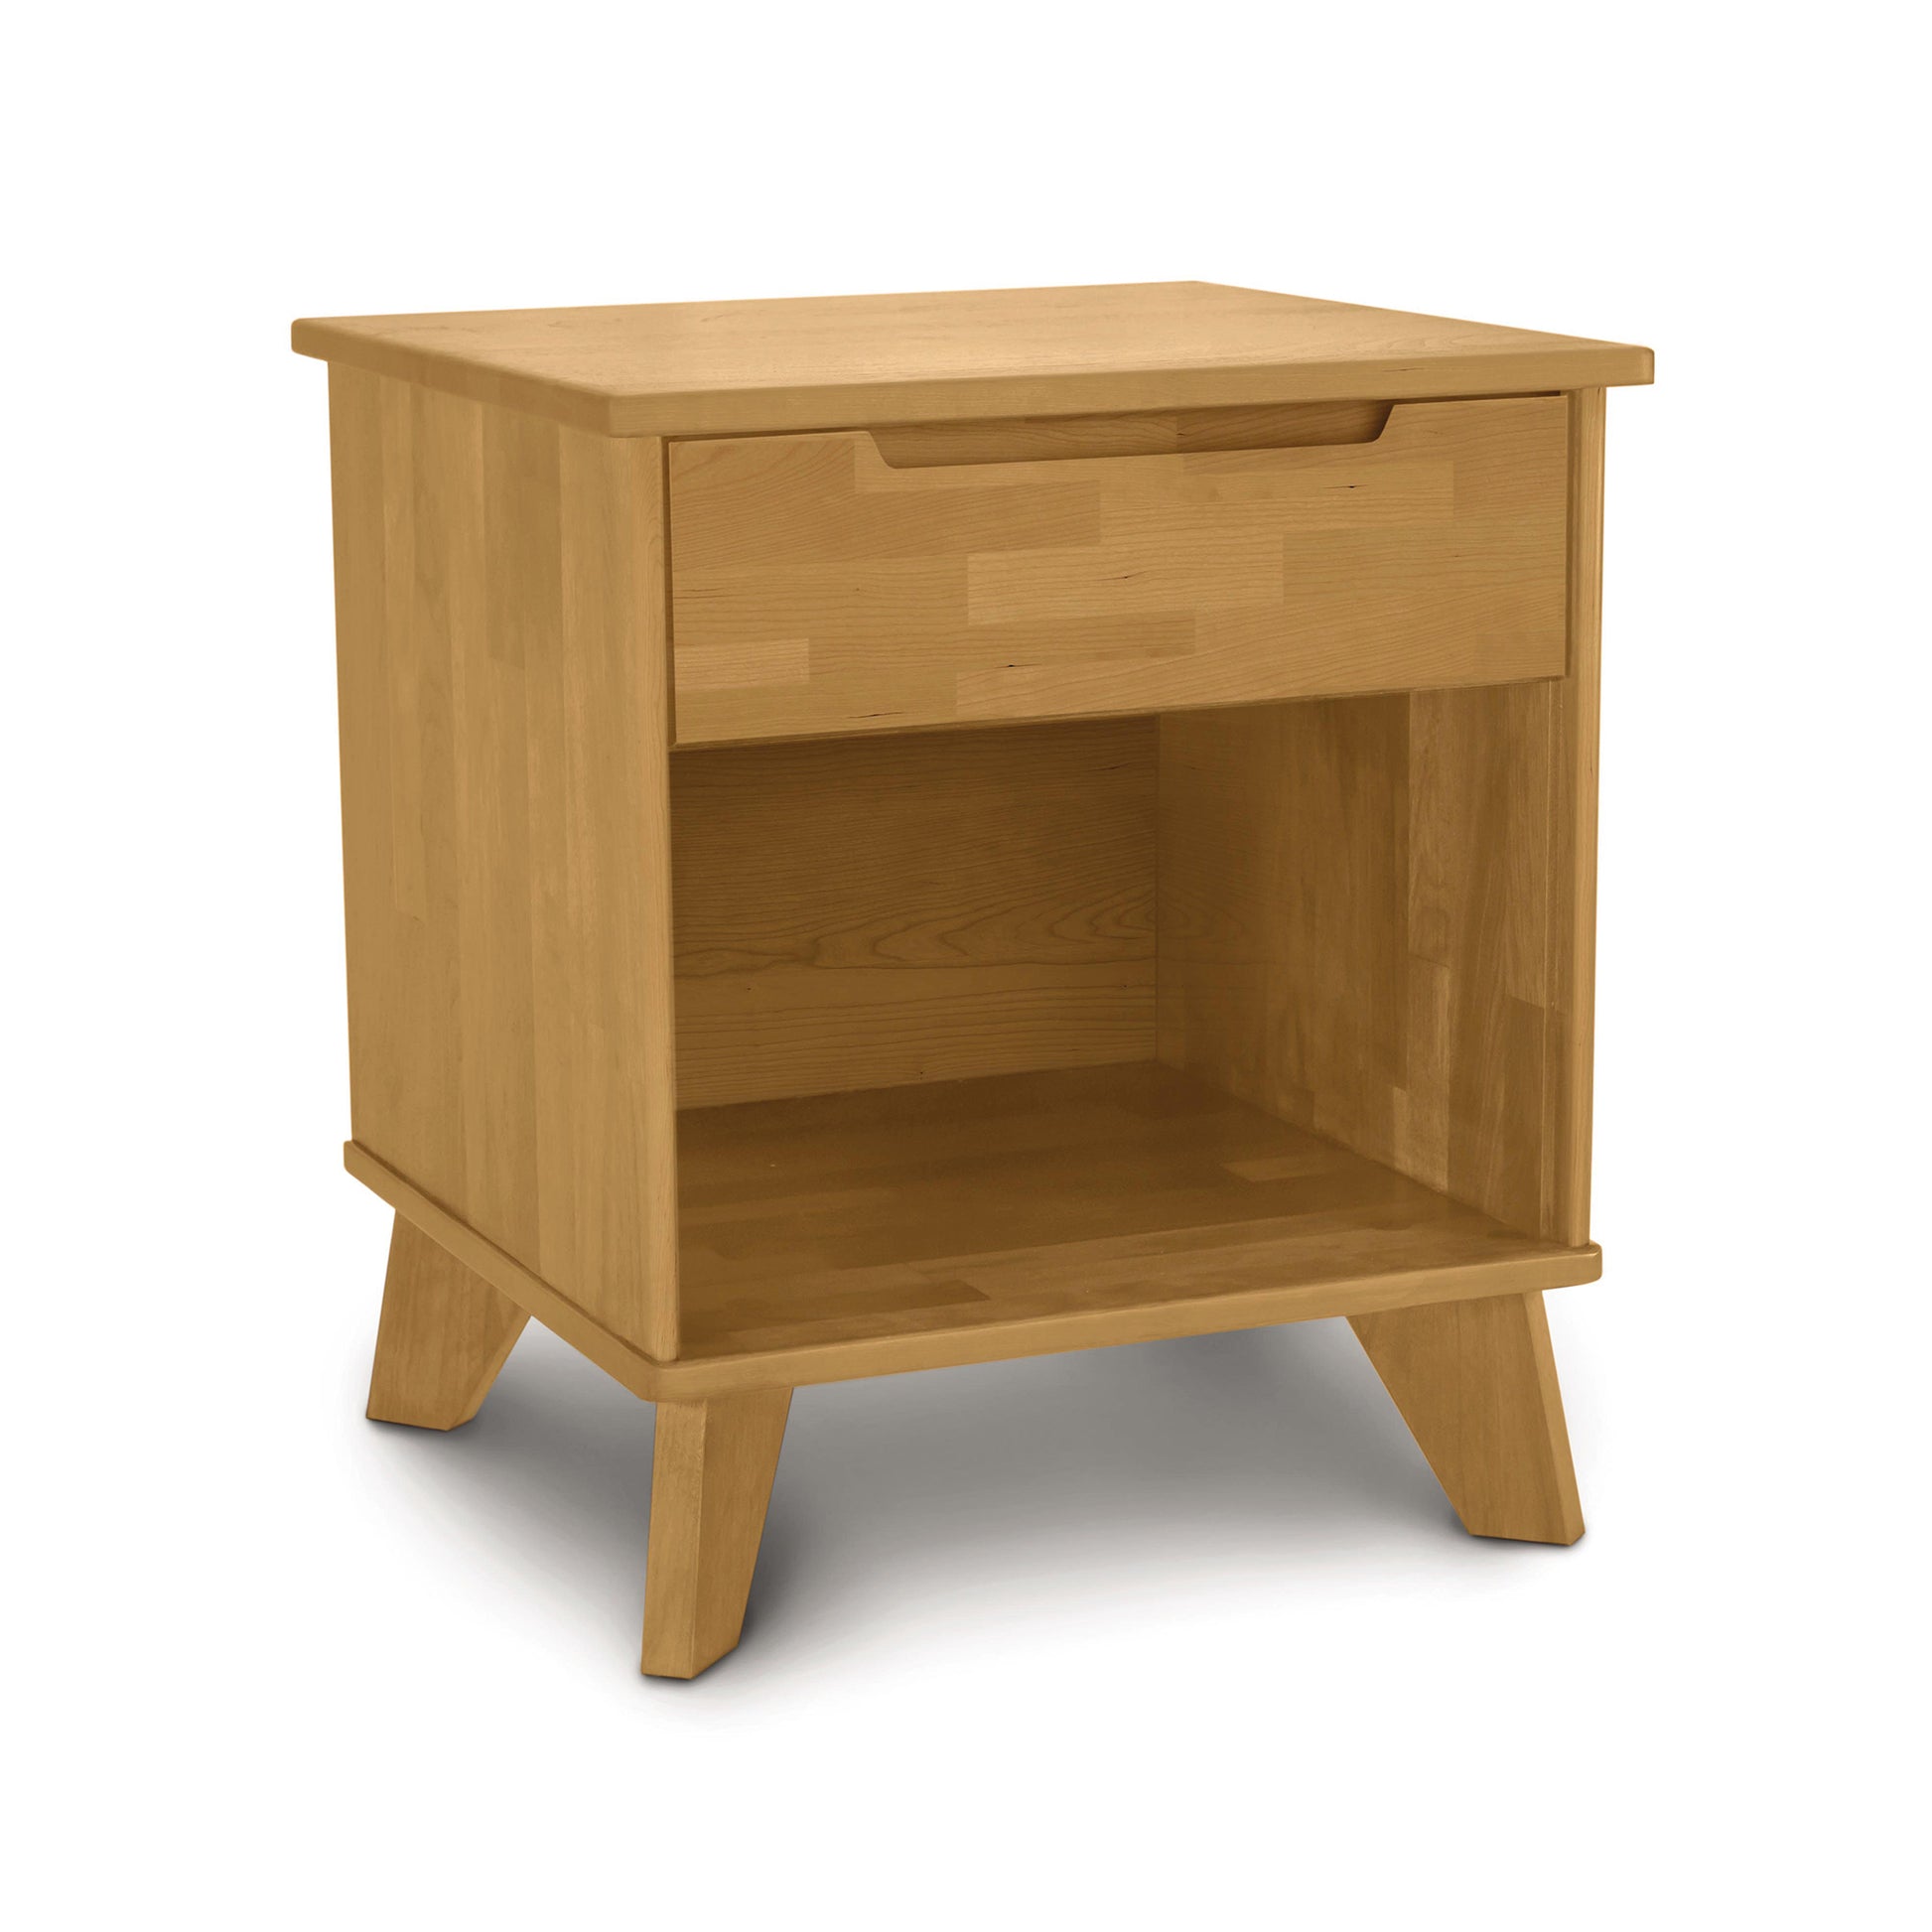 Sustainable solid wood Linn 1-Drawer Enclosed Shelf Nightstand by Copeland Furniture, isolated on a white background.